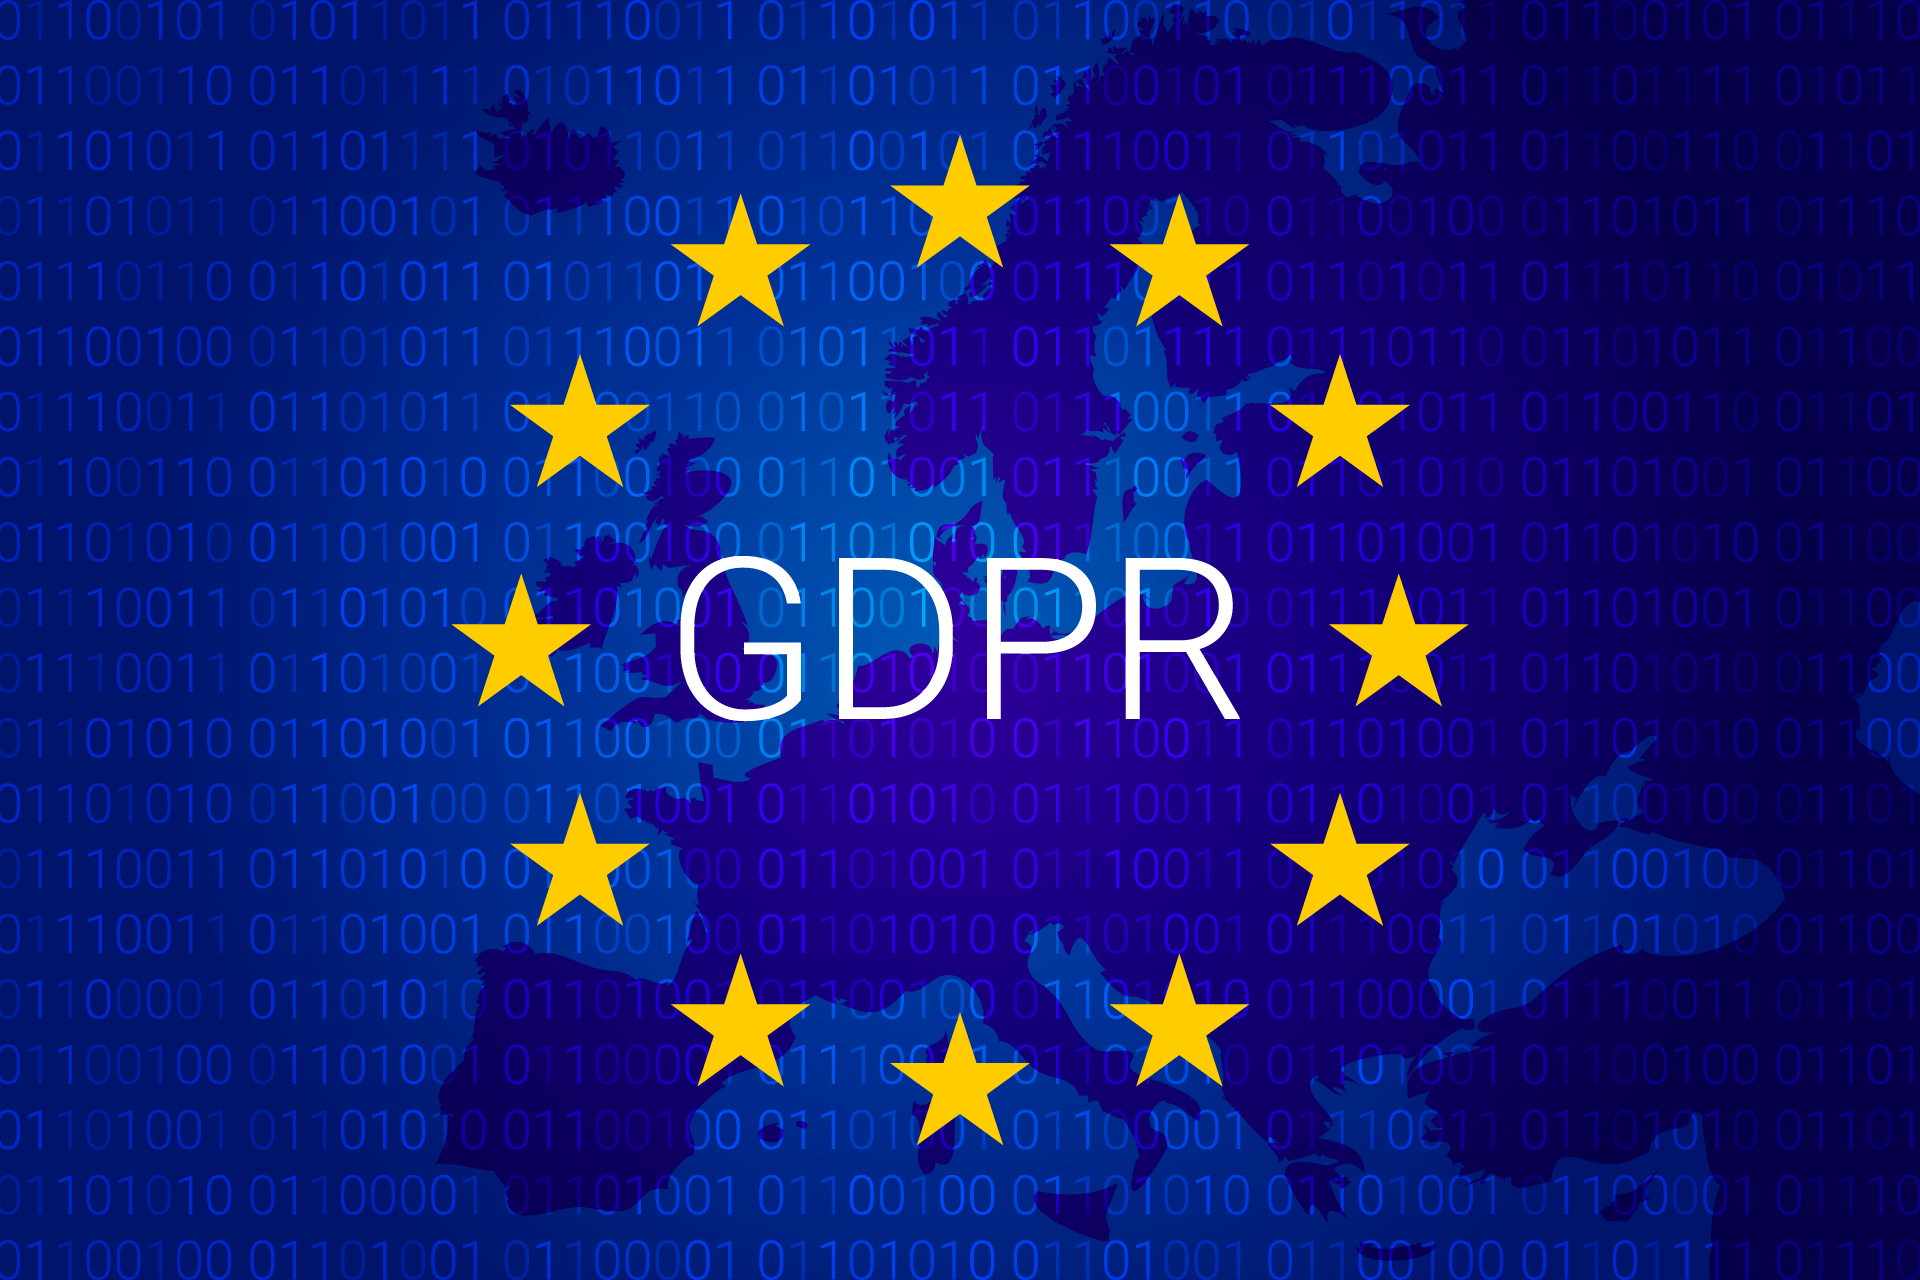 Ready for GDPR in a Software Usage Analytics World